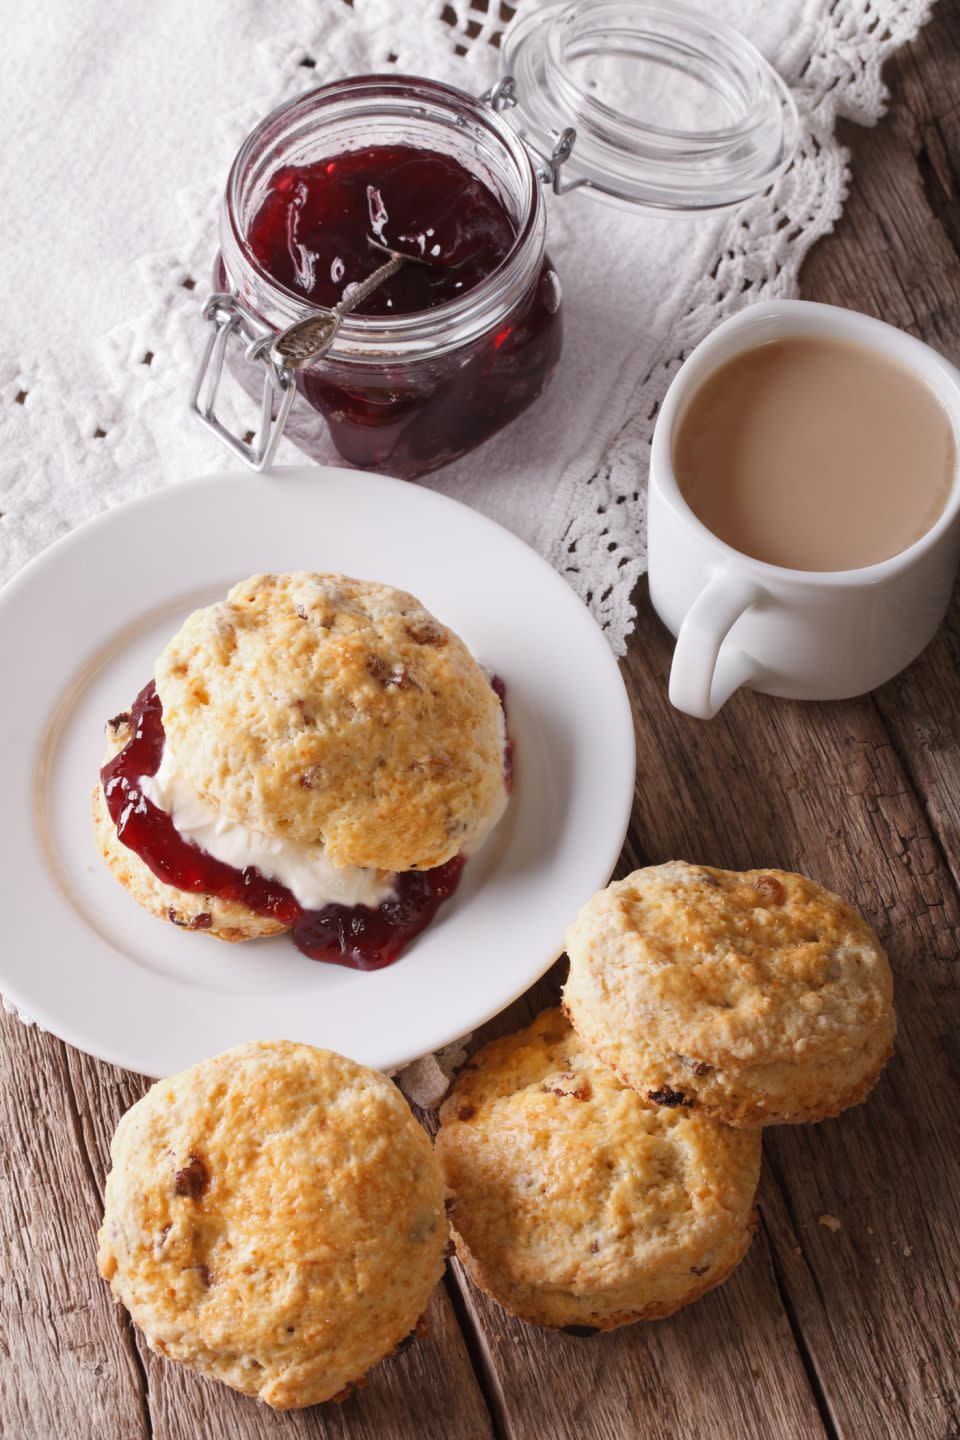 Do you put jam or cream on your scone first? Photo: Getty Images